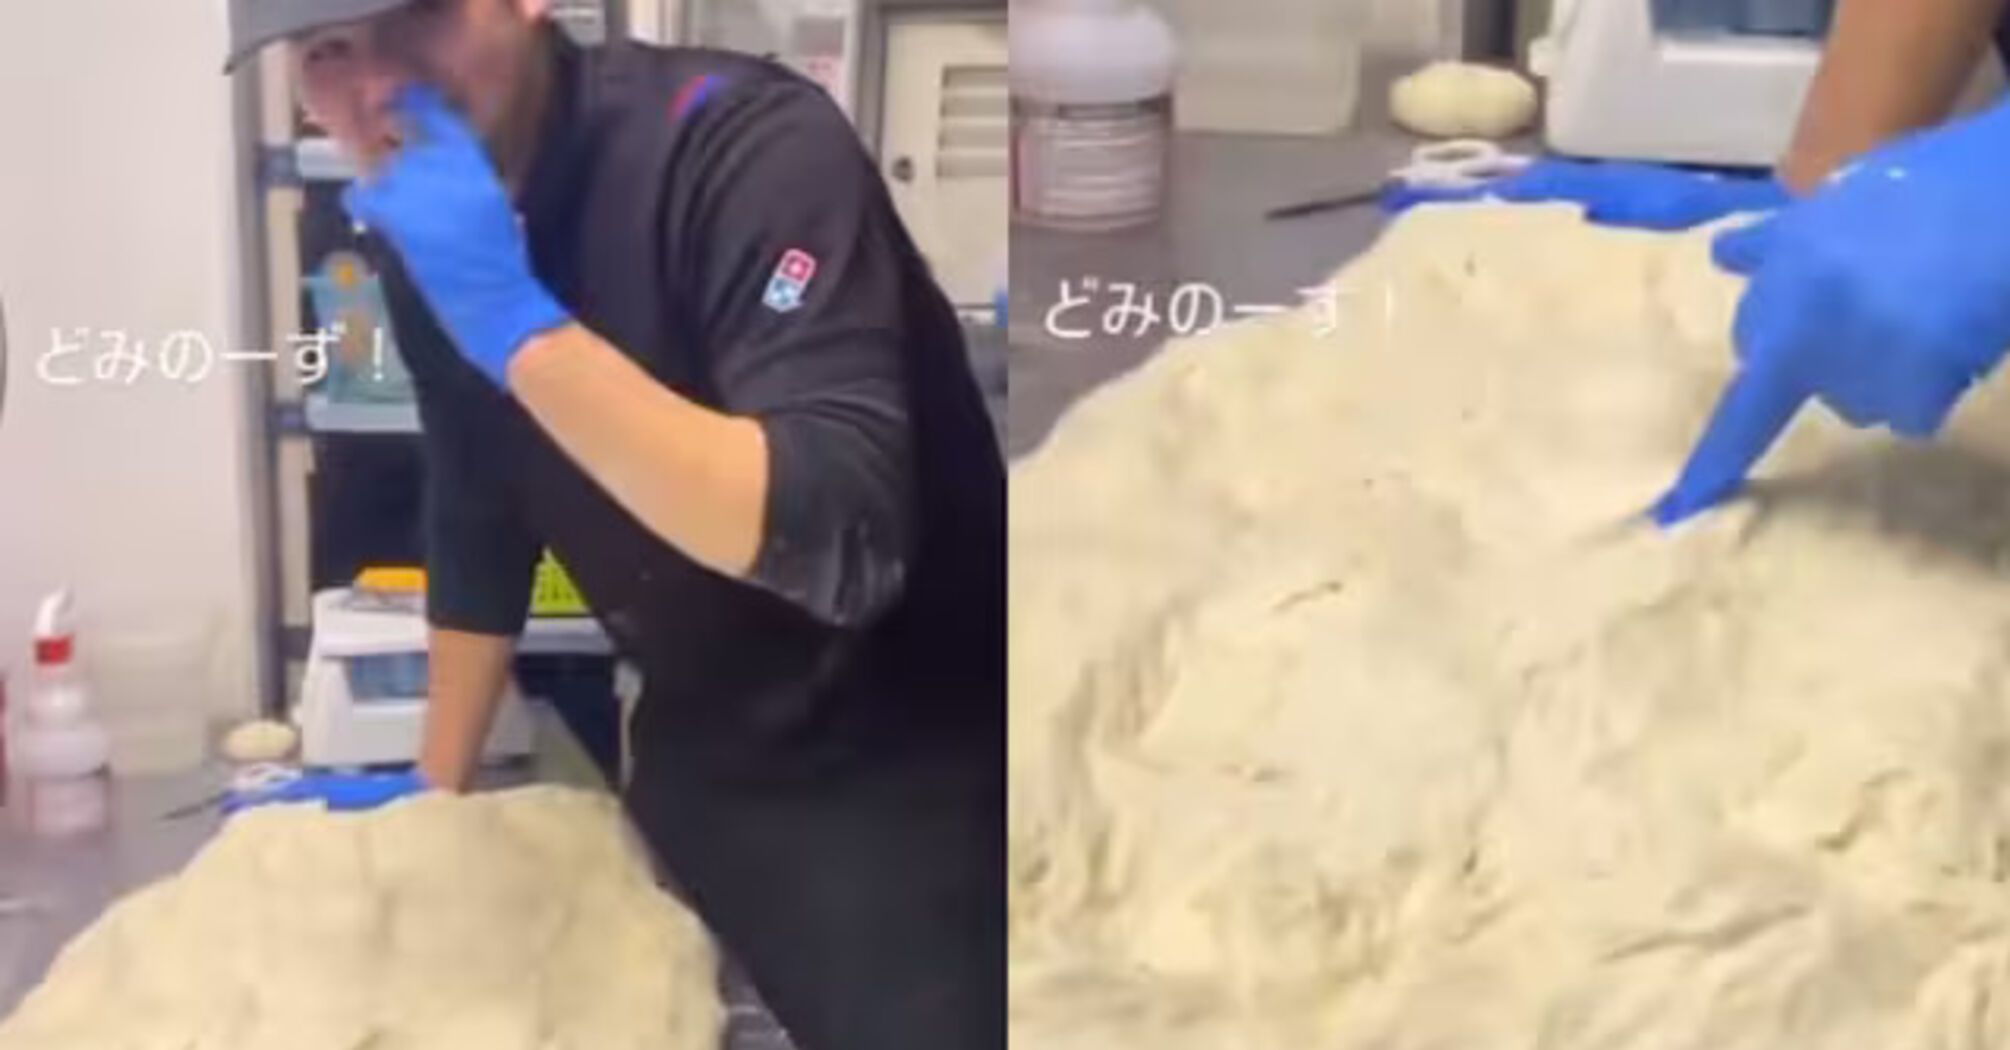 An employee of a famous pizzeria picked his nose